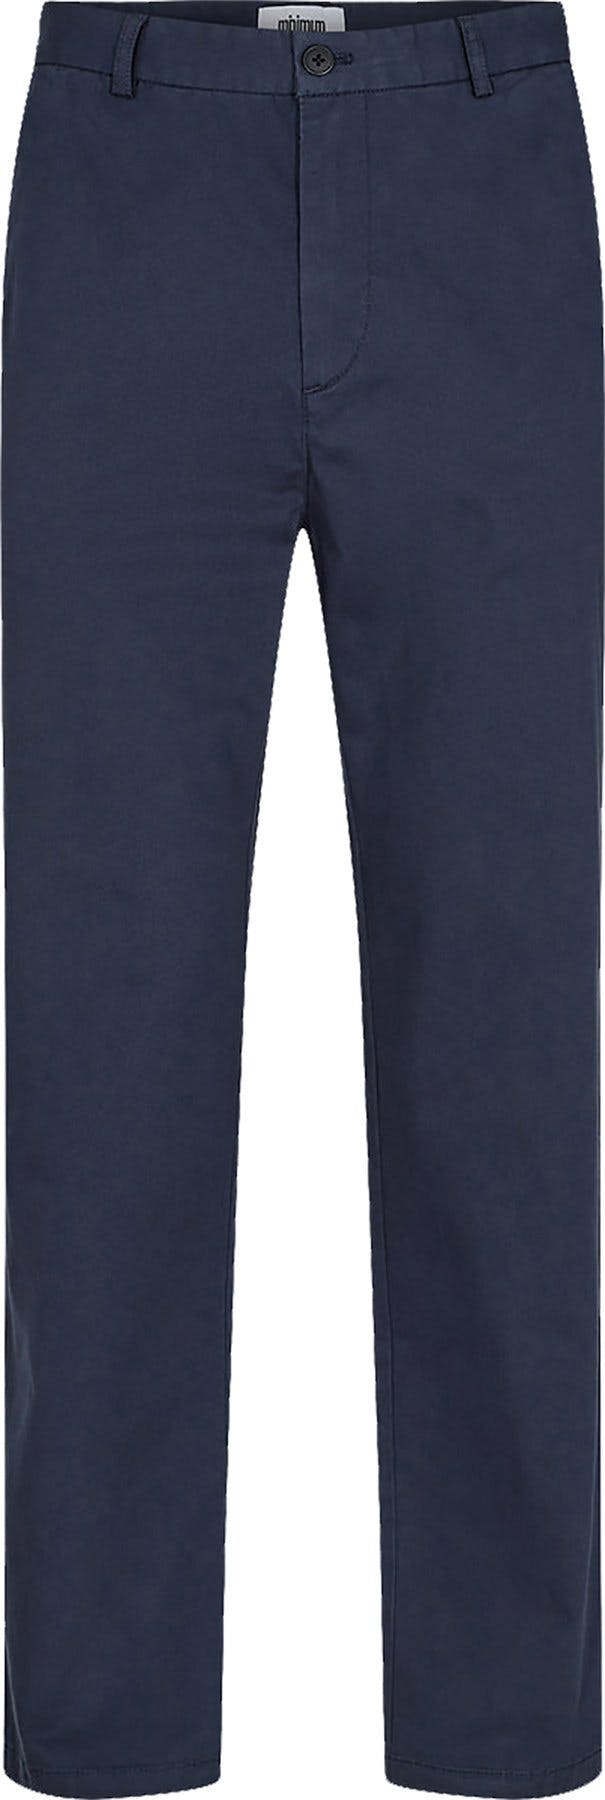 Product image for Jalte 9344 Casual Pants - Men's